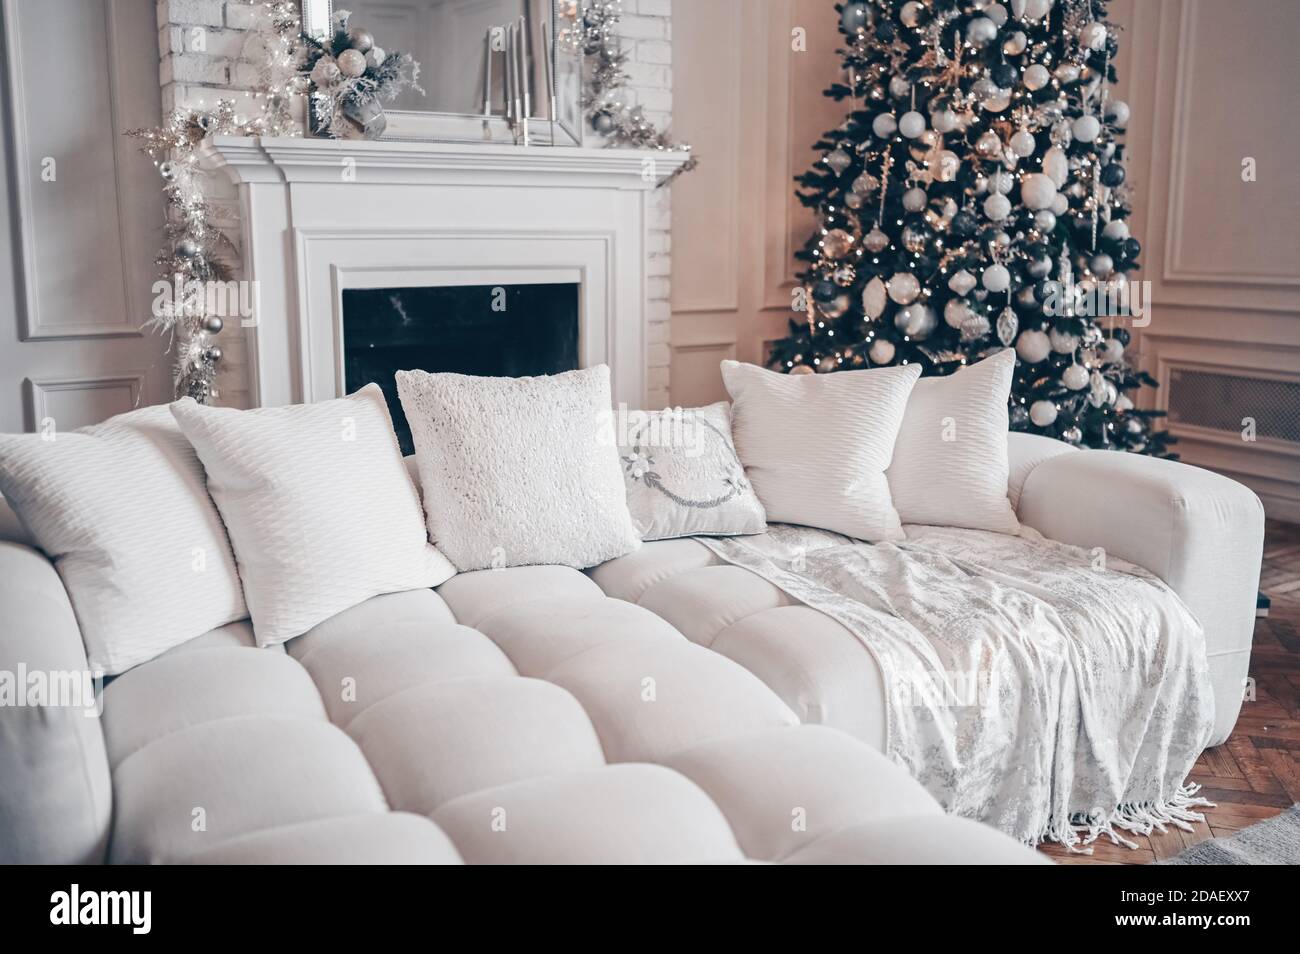 https://c8.alamy.com/comp/2DAEXX7/decorated-christmas-tree-with-gifts-in-white-classic-living-room-interior-with-new-years-holiday-sparkling-garland-a-bright-room-with-white-modern-cozy-sofa-and-fireplace-2DAEXX7.jpg